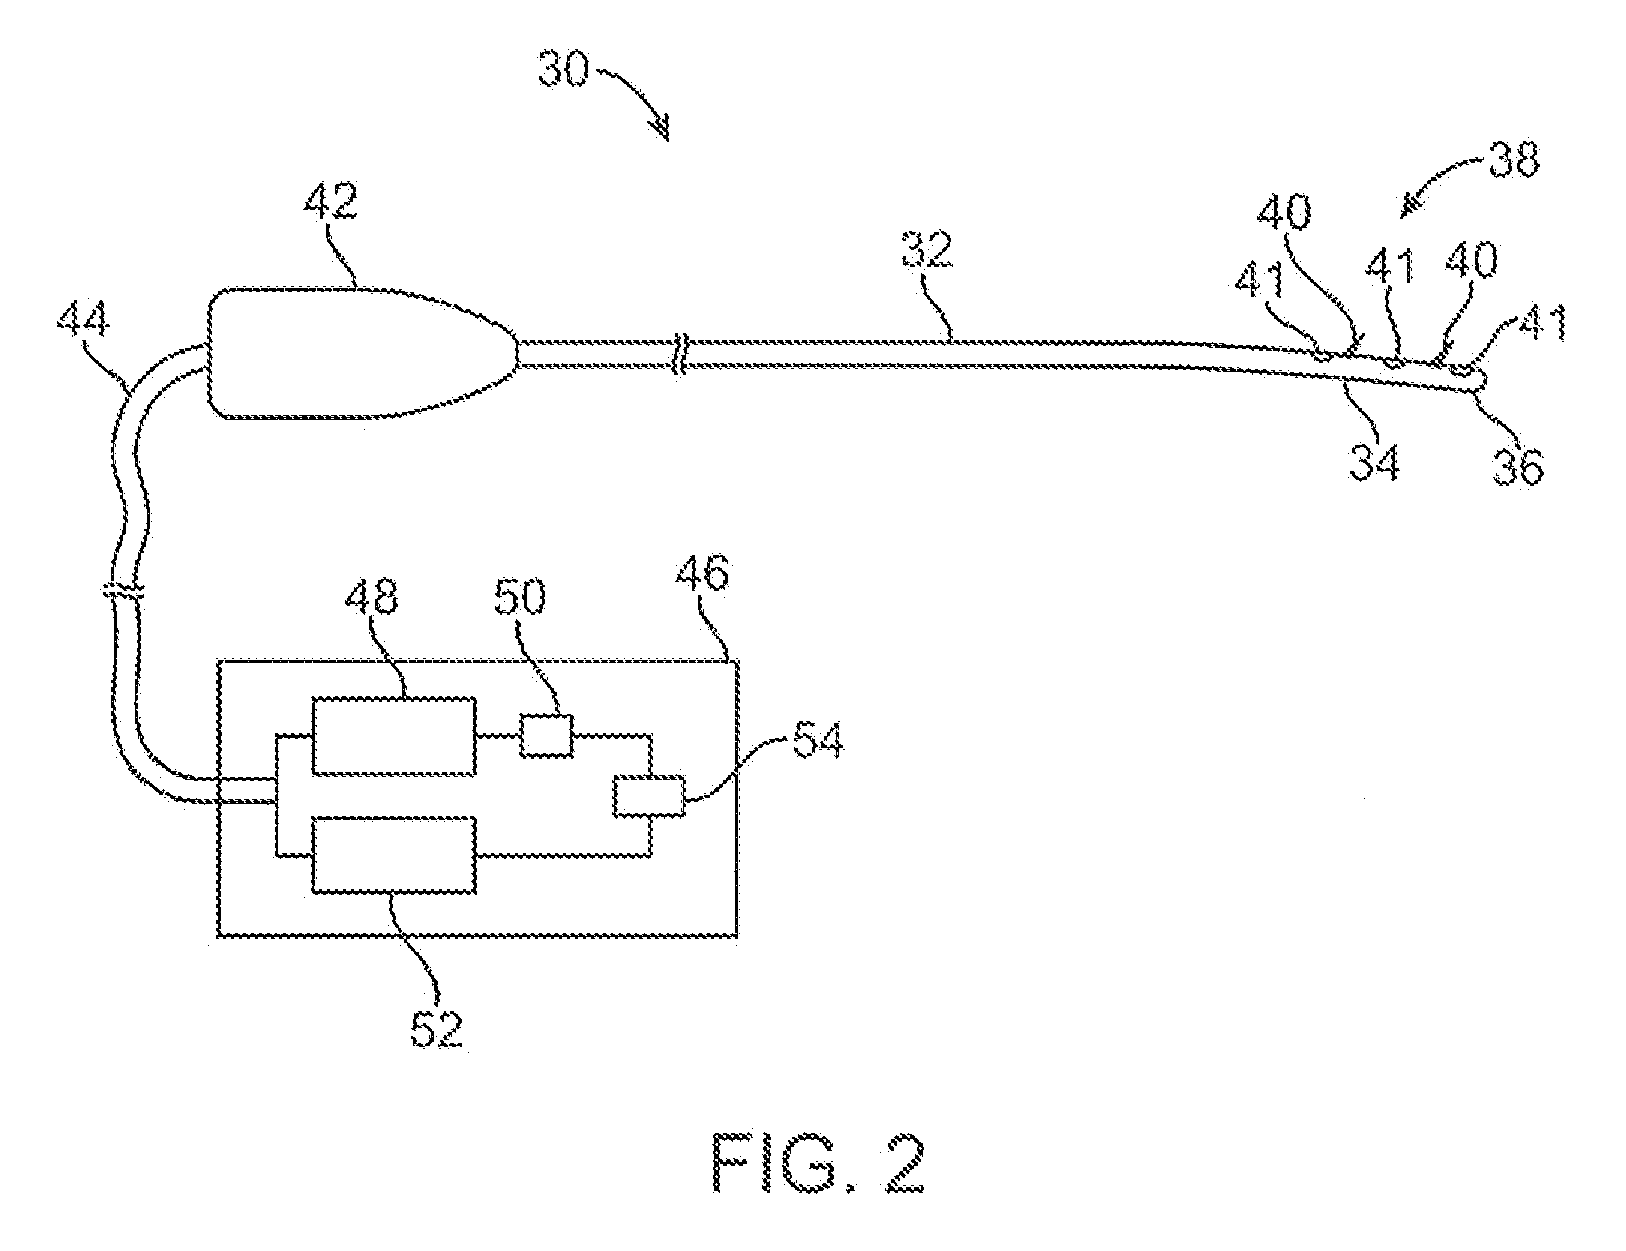 Apparatus and methods for treatment of nasal tissue